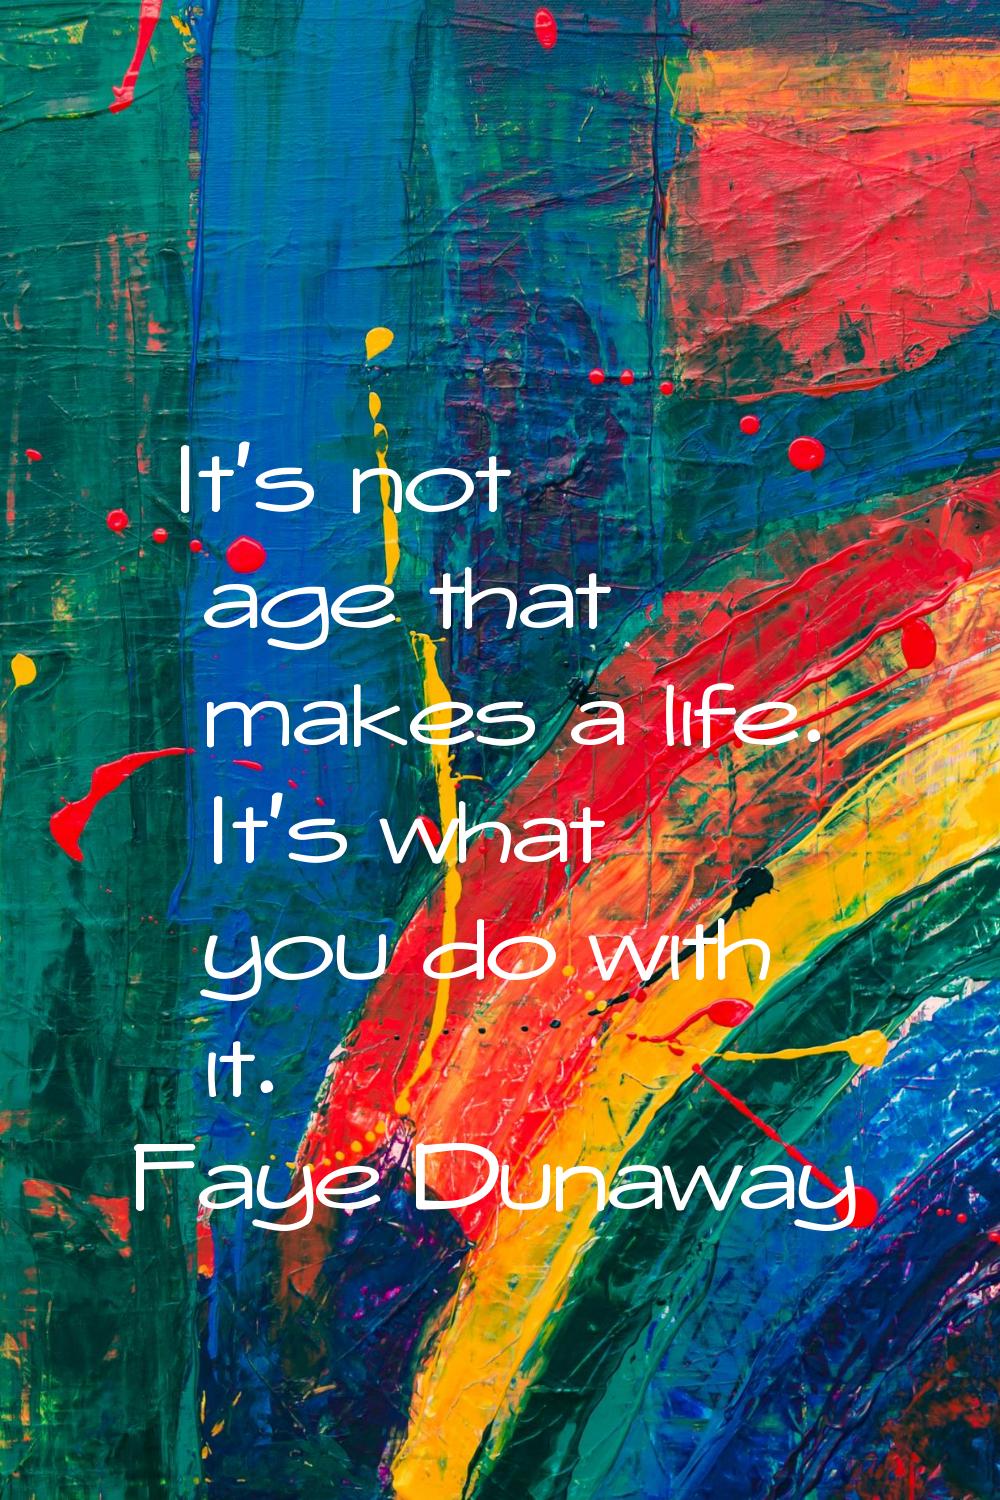 It's not age that makes a life. It's what you do with it.